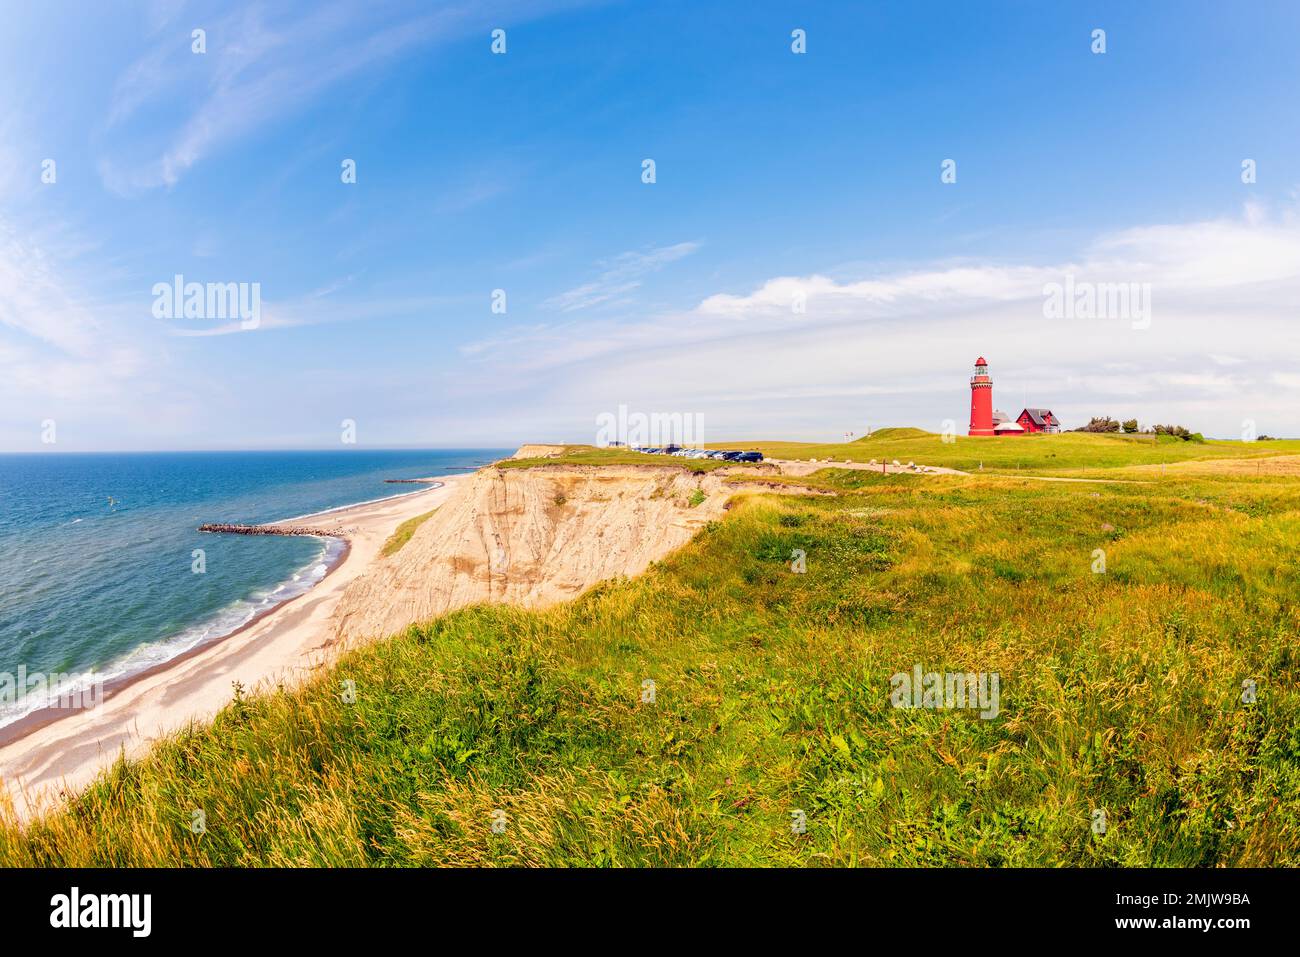 View on Bovbjerg Lighthouse and coastline in Lemvig Denmark. The Lighthouse was built in 1877. Stock Photo